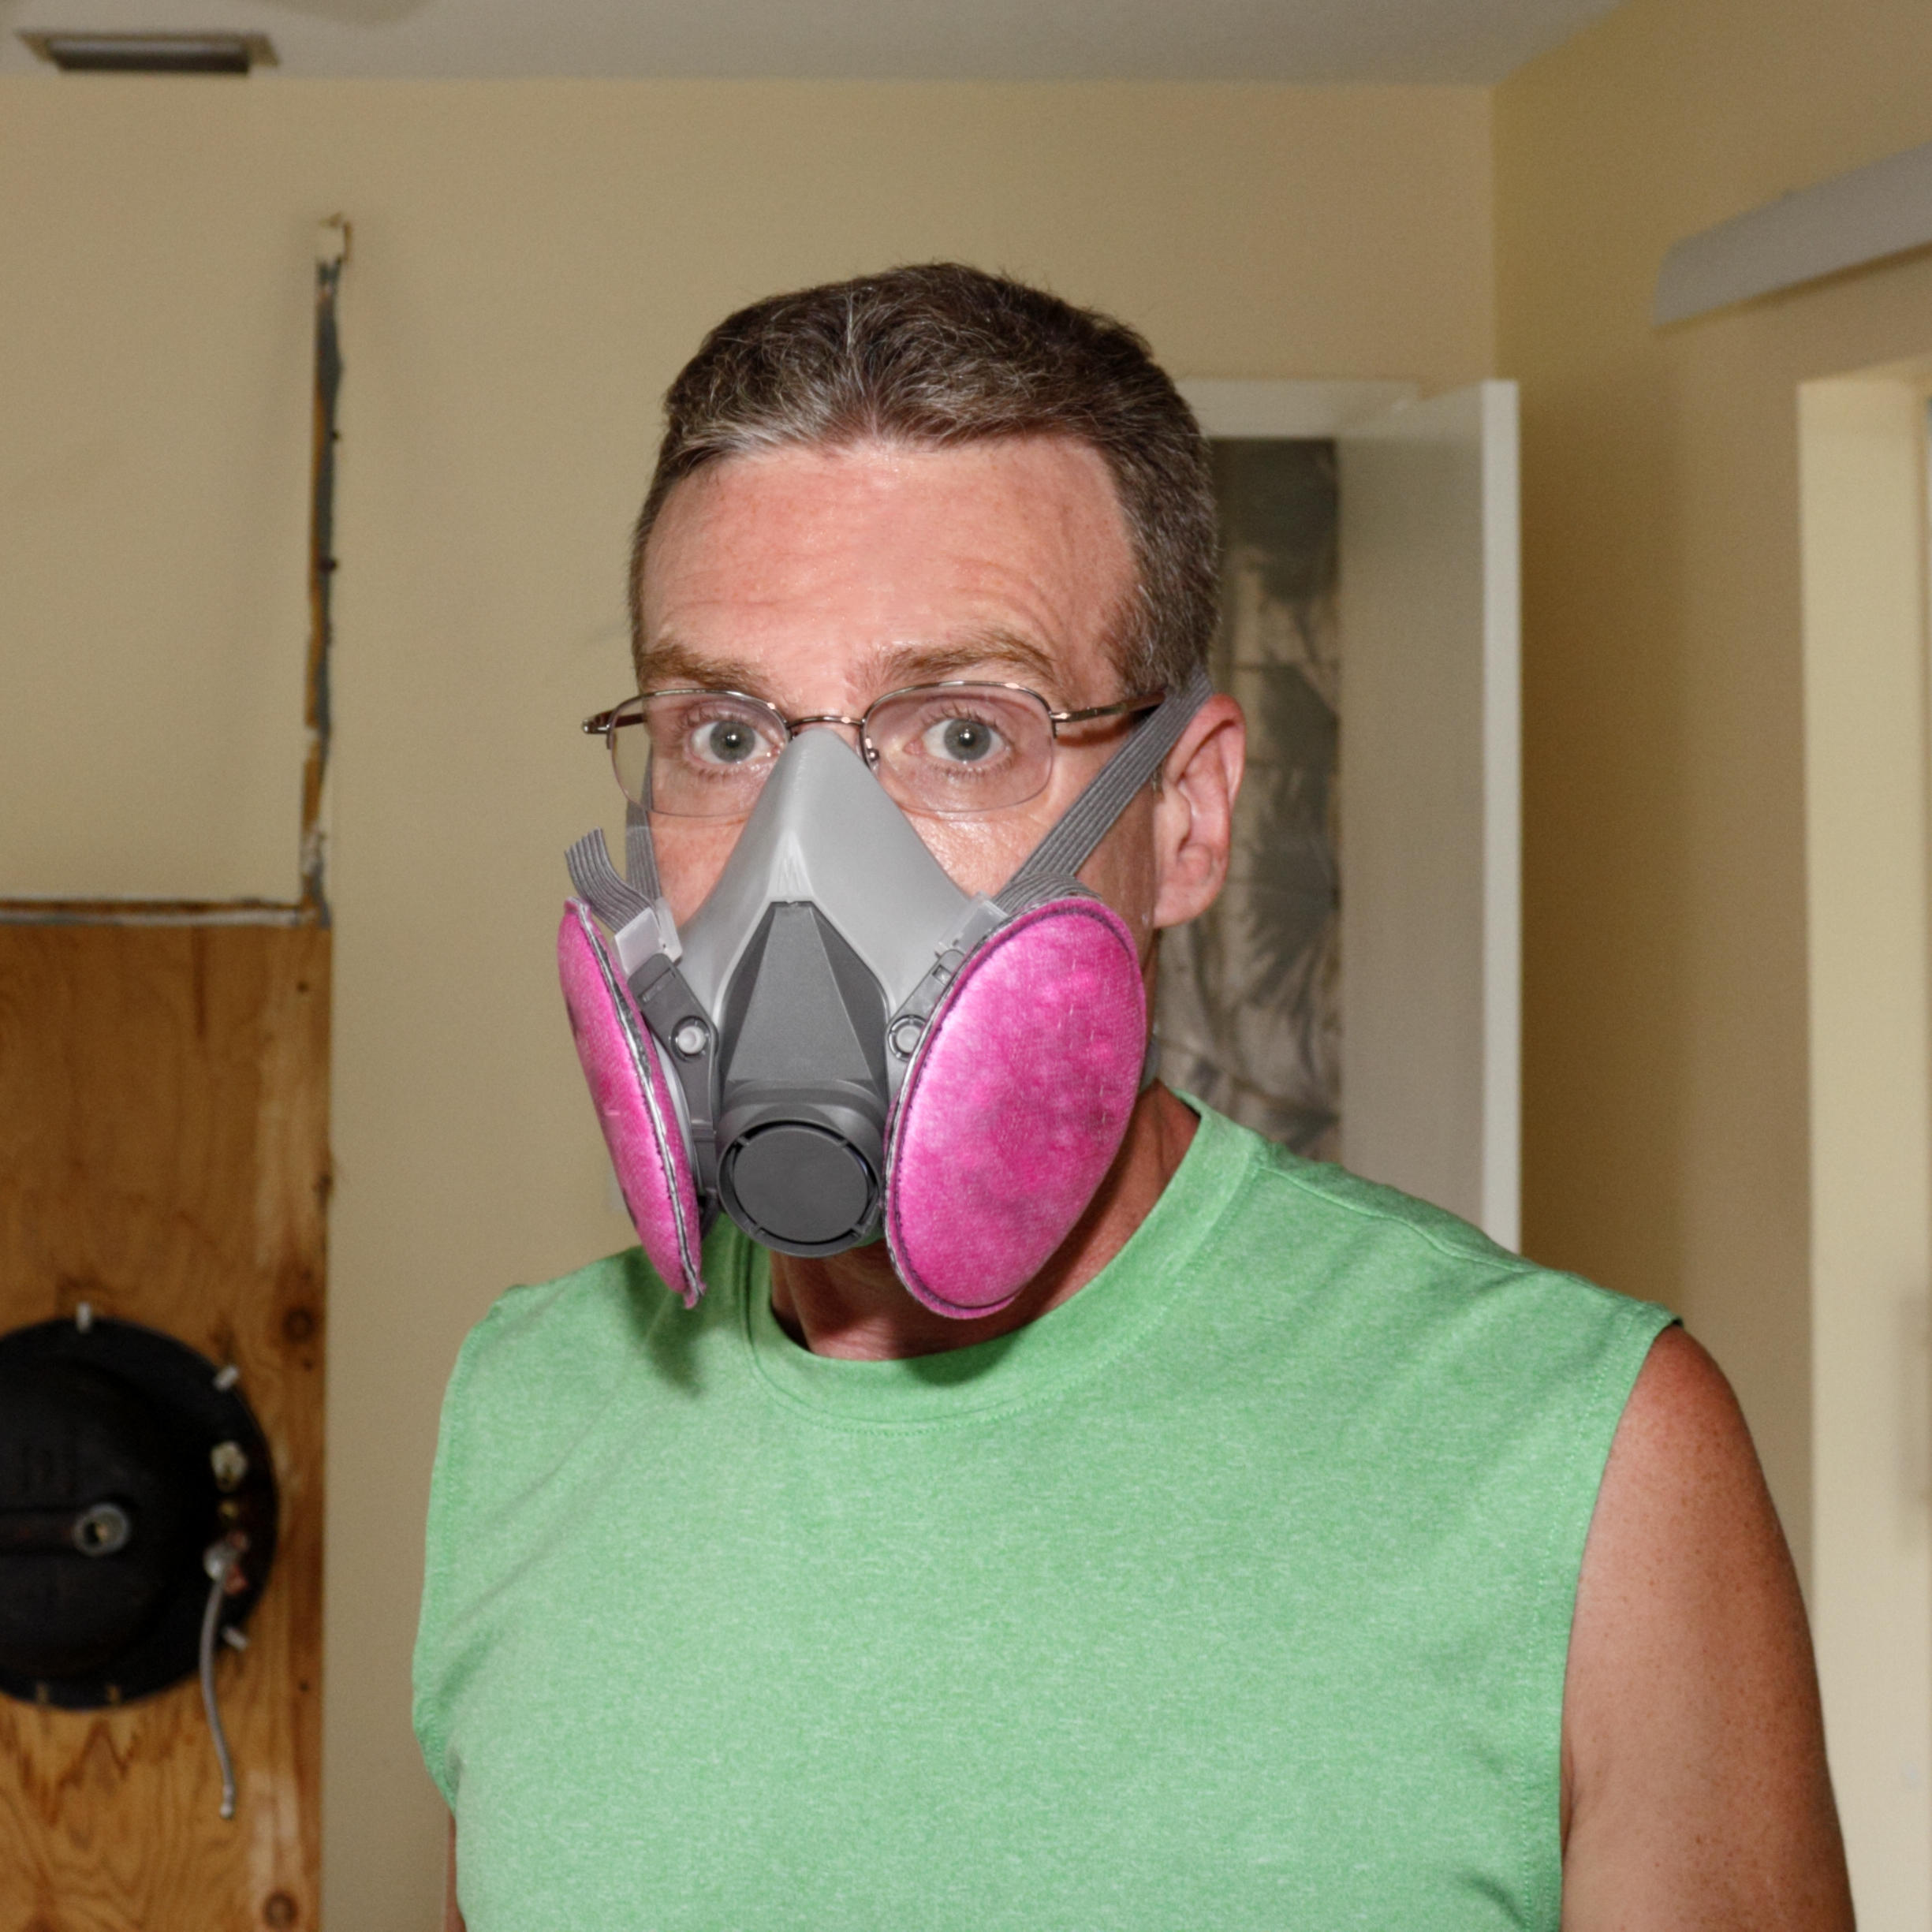 Caucasian man wearing a pink and gray ventilator mask that helps protect his health from mold as he works on a home renovation project.